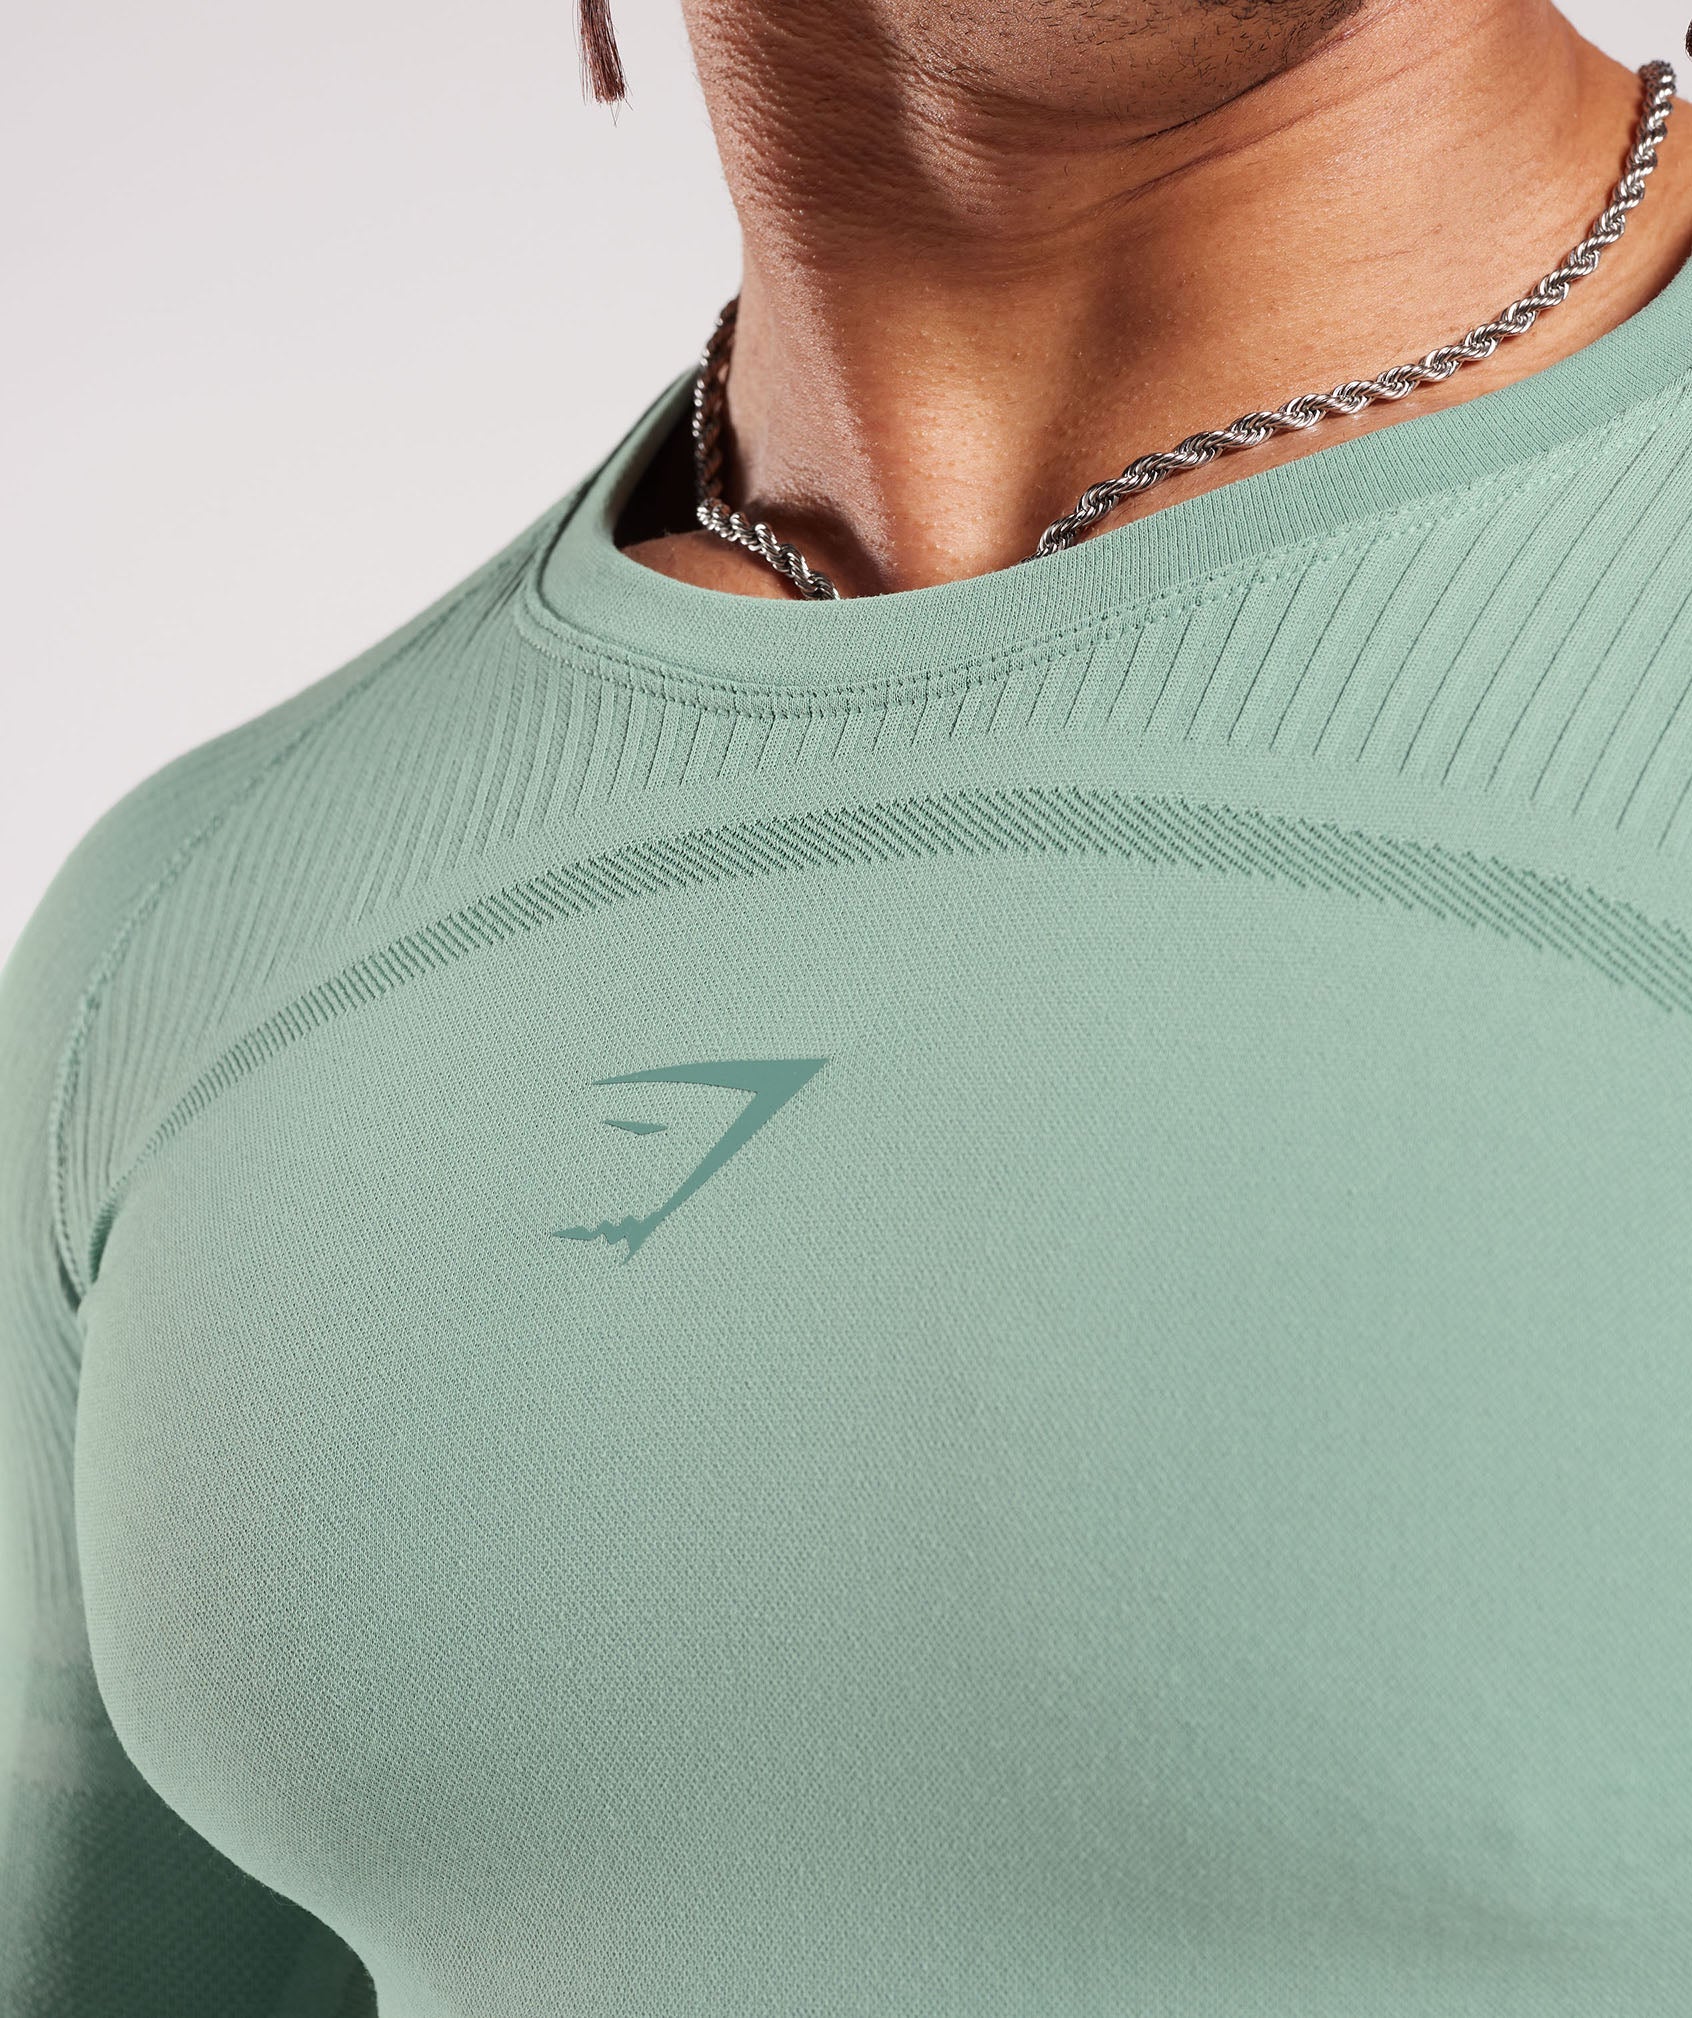 315 Seamless Long Sleeve T-Shirt in Frost Teal/Ink Teal